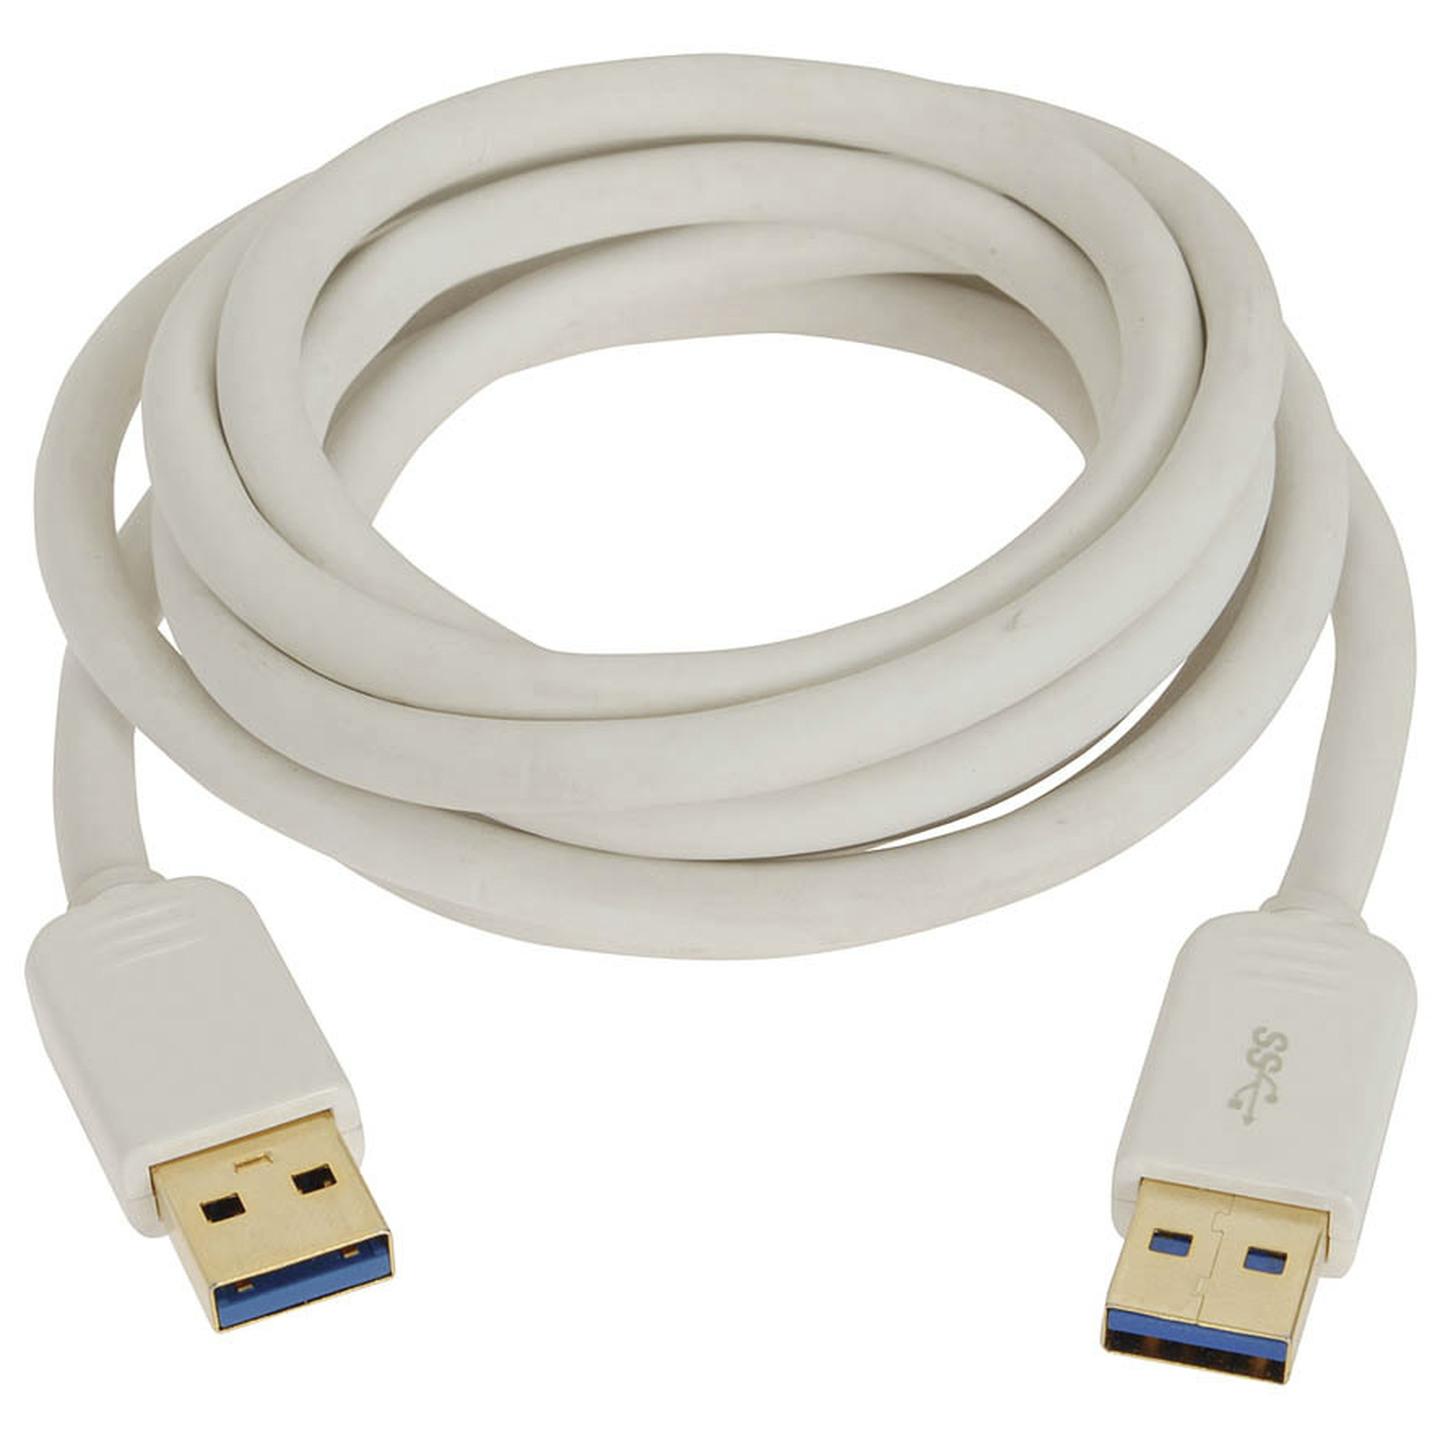 High Quality USB 3.0 A male to A male Cable - 2m